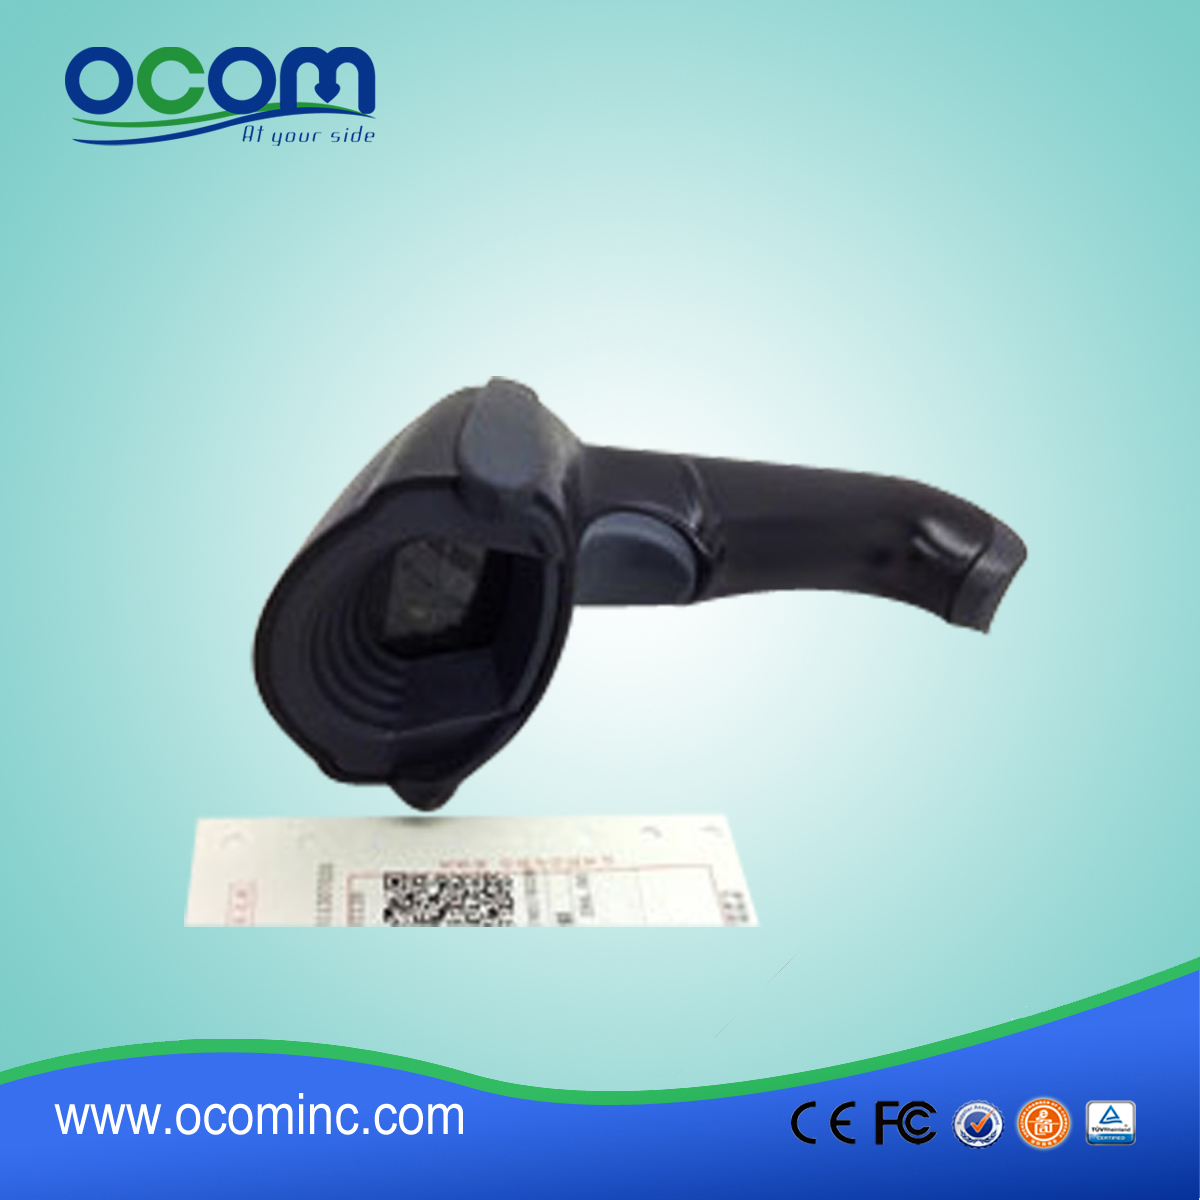 Barcode Scanner 2D USB Android --OCBS 2006